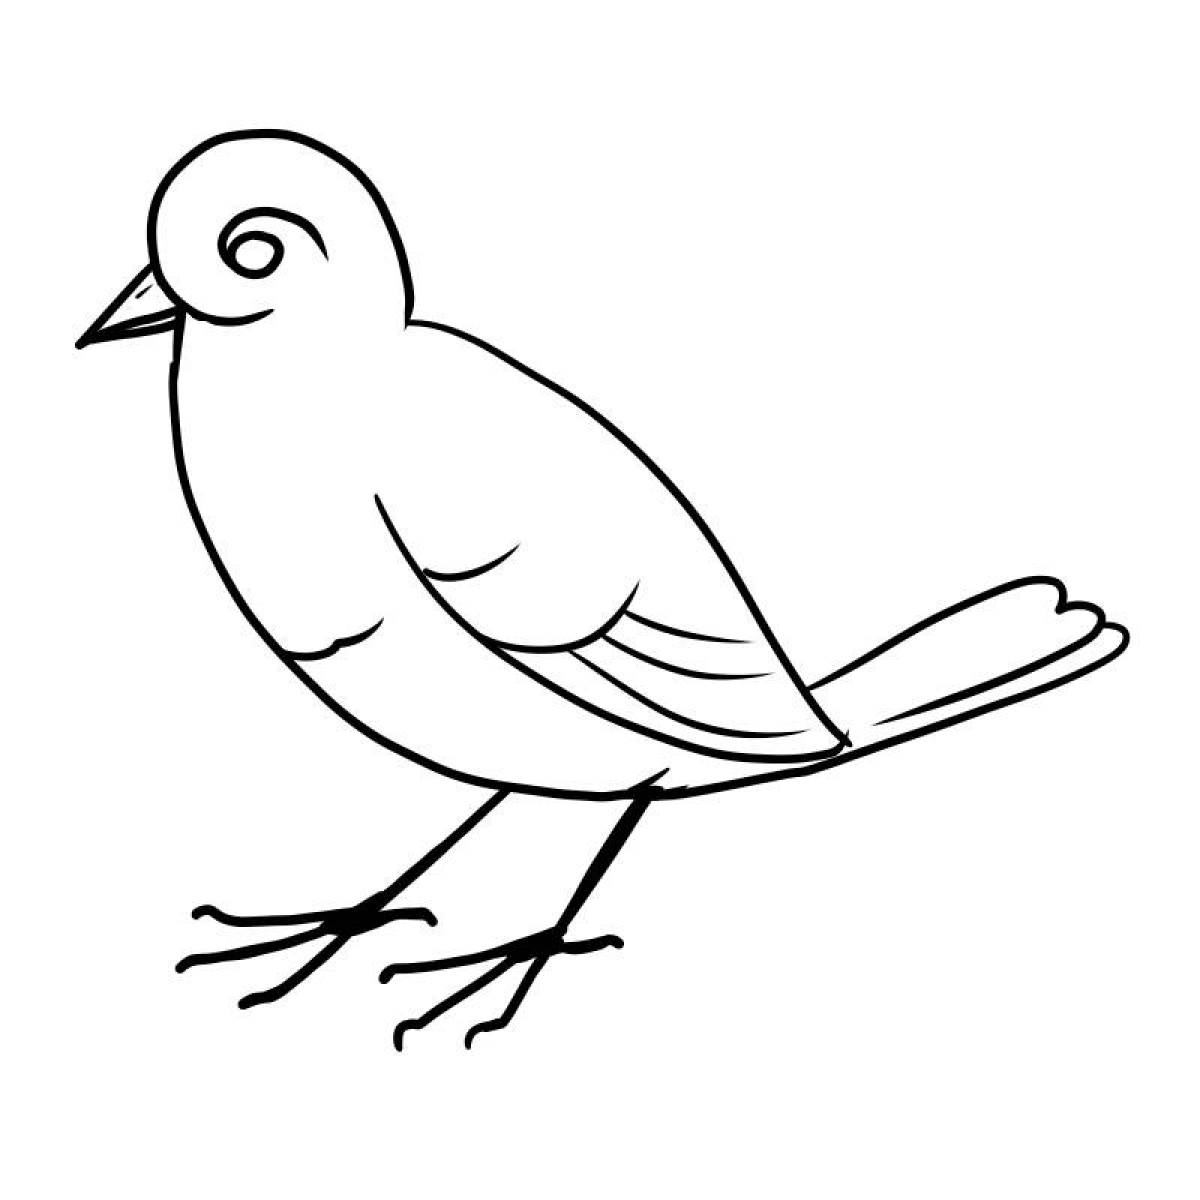 Adorable bird coloring page for 3-4 year olds